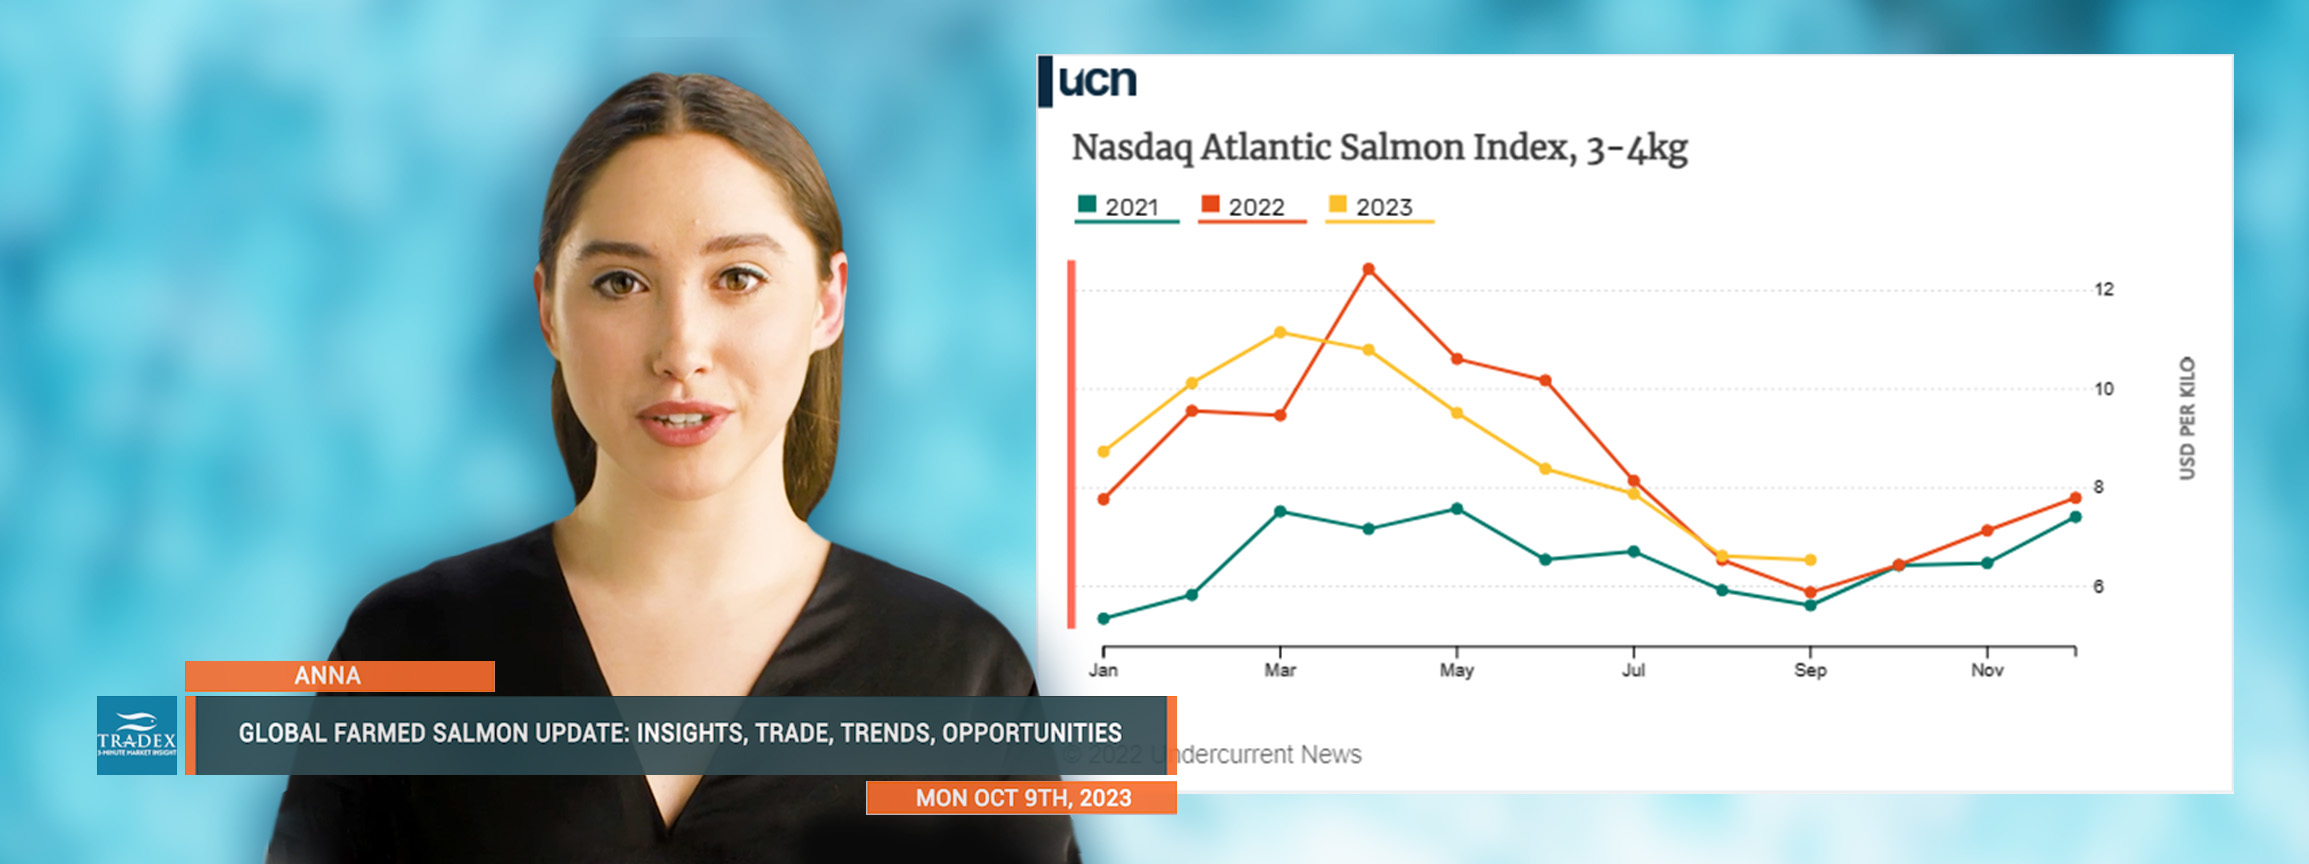 Global Farmed Salmon Update: Insights, Trade, Trends, Opportunities